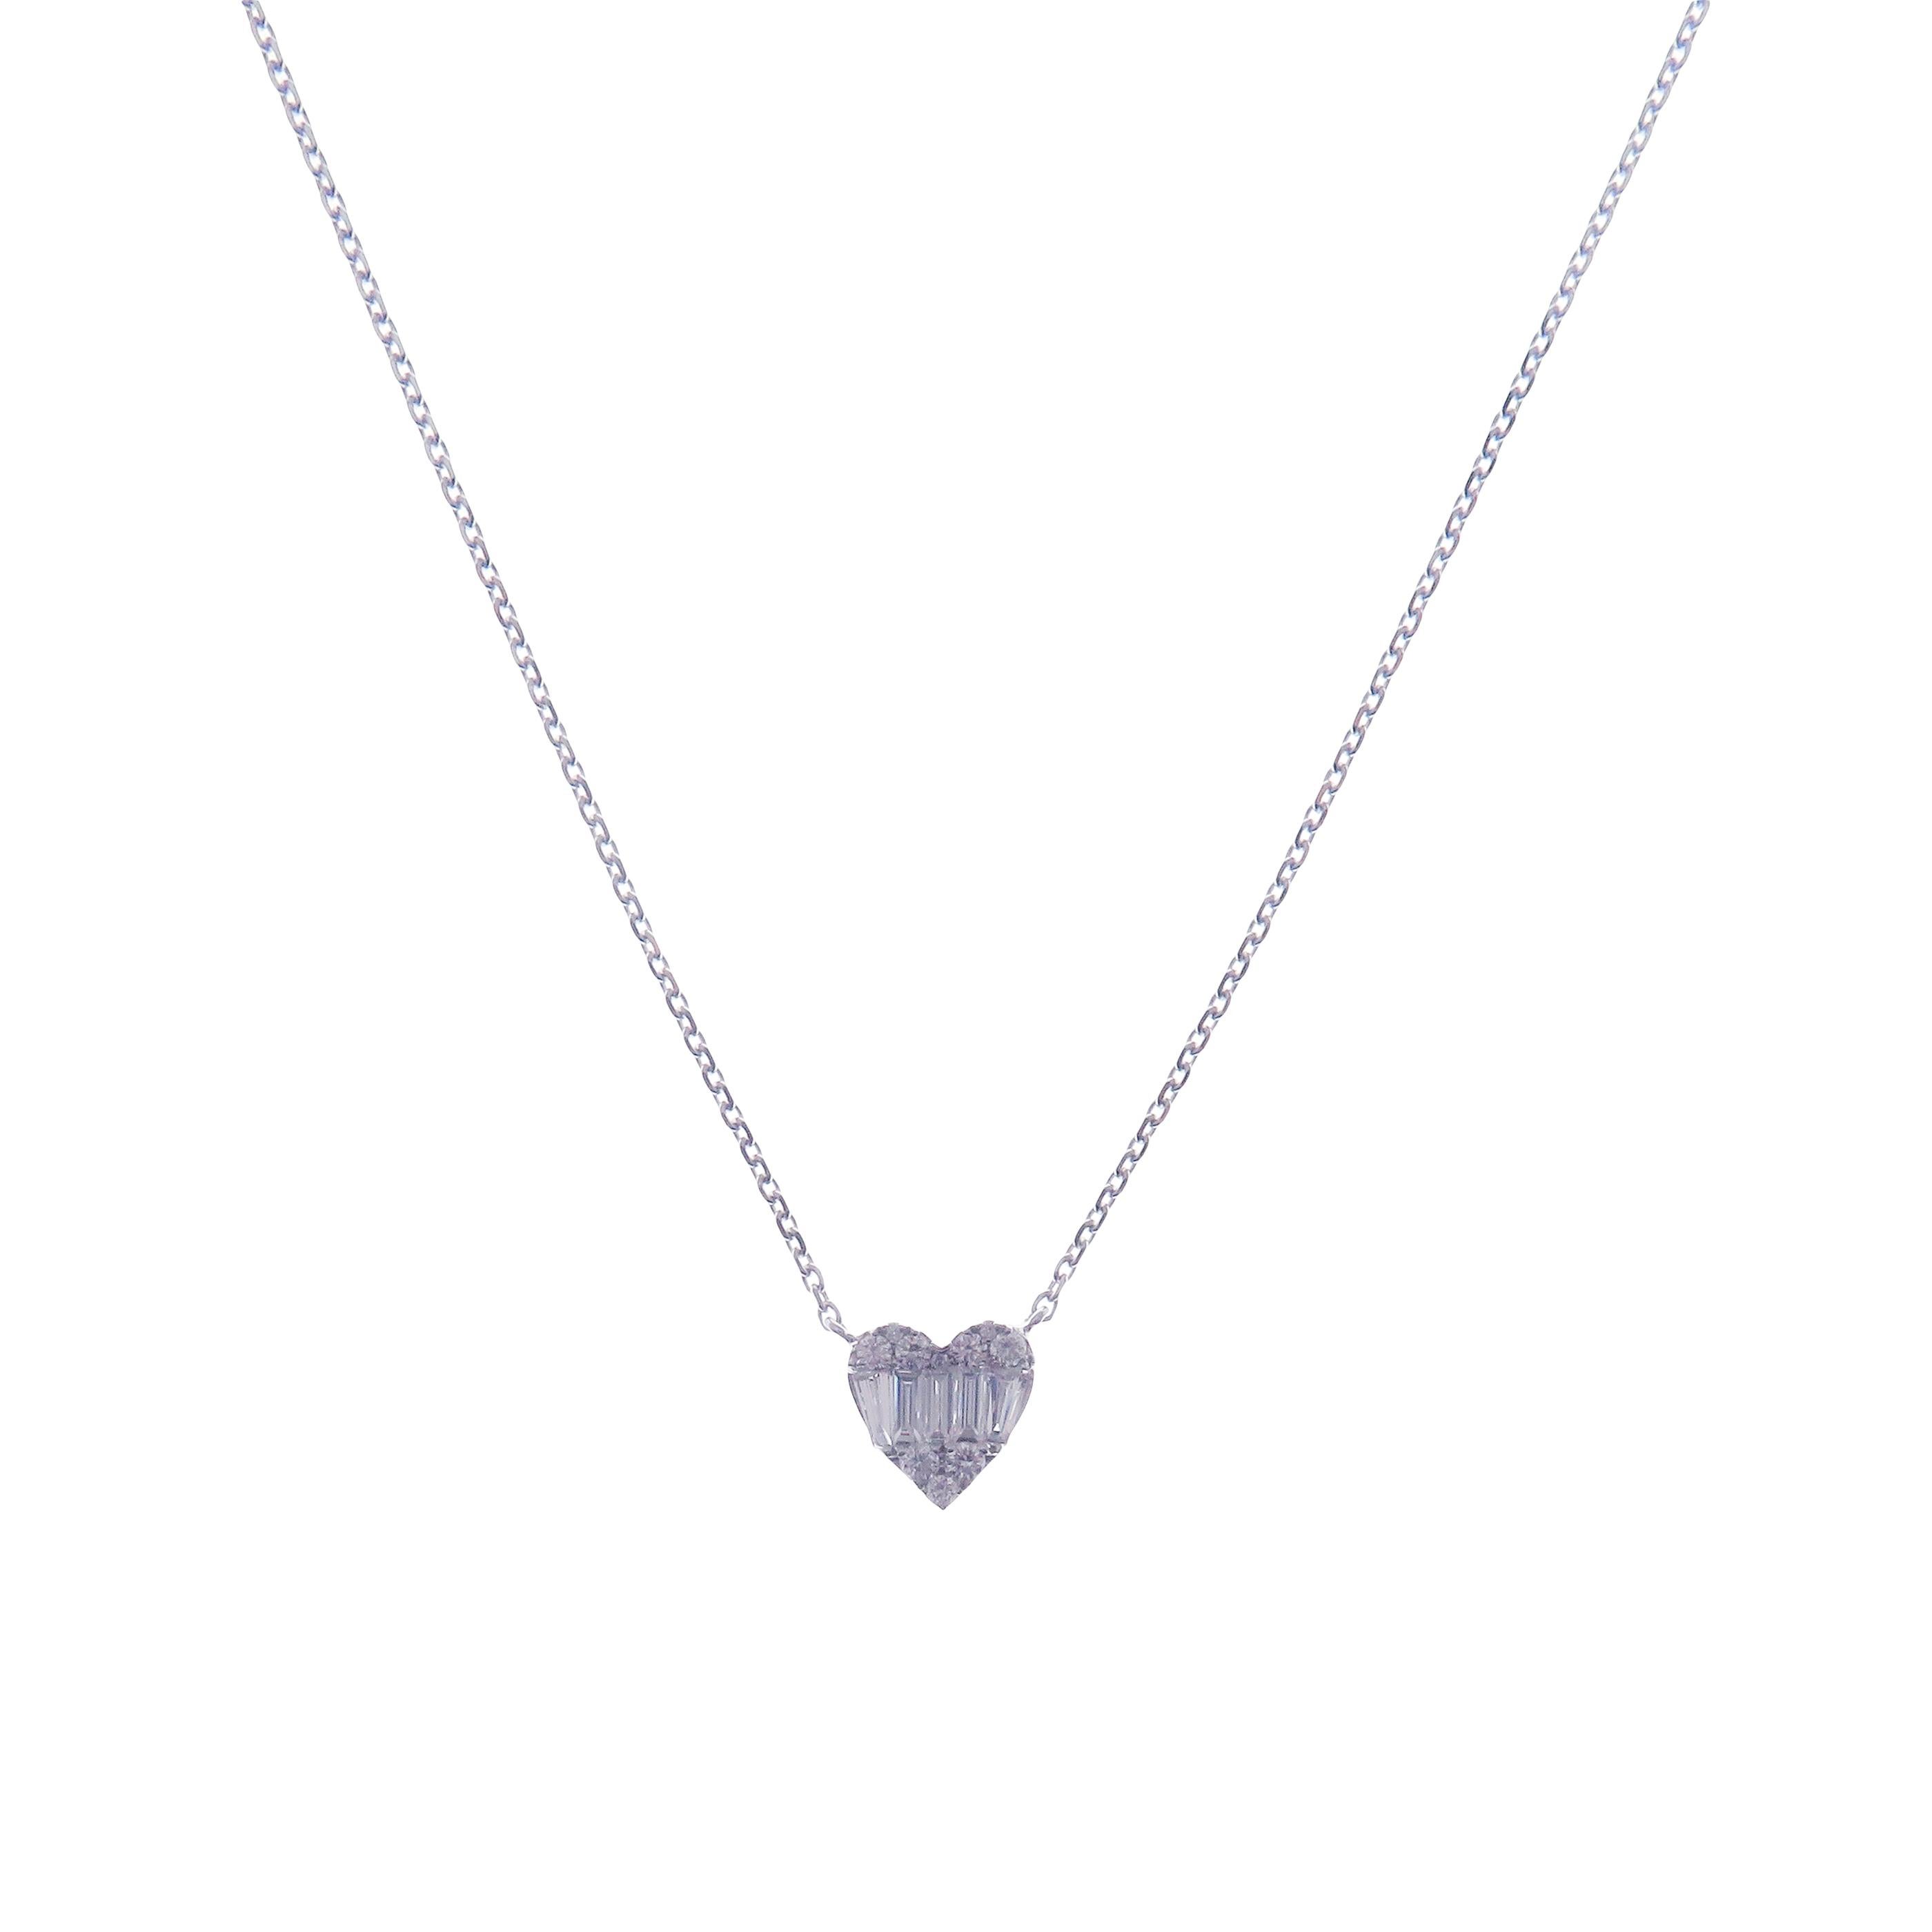 This large sweet hearts necklace is crafted in 18-karat white gold, weighing approximately 0.58 total carats of SI-V Quality white diamonds.

Necklace is 16